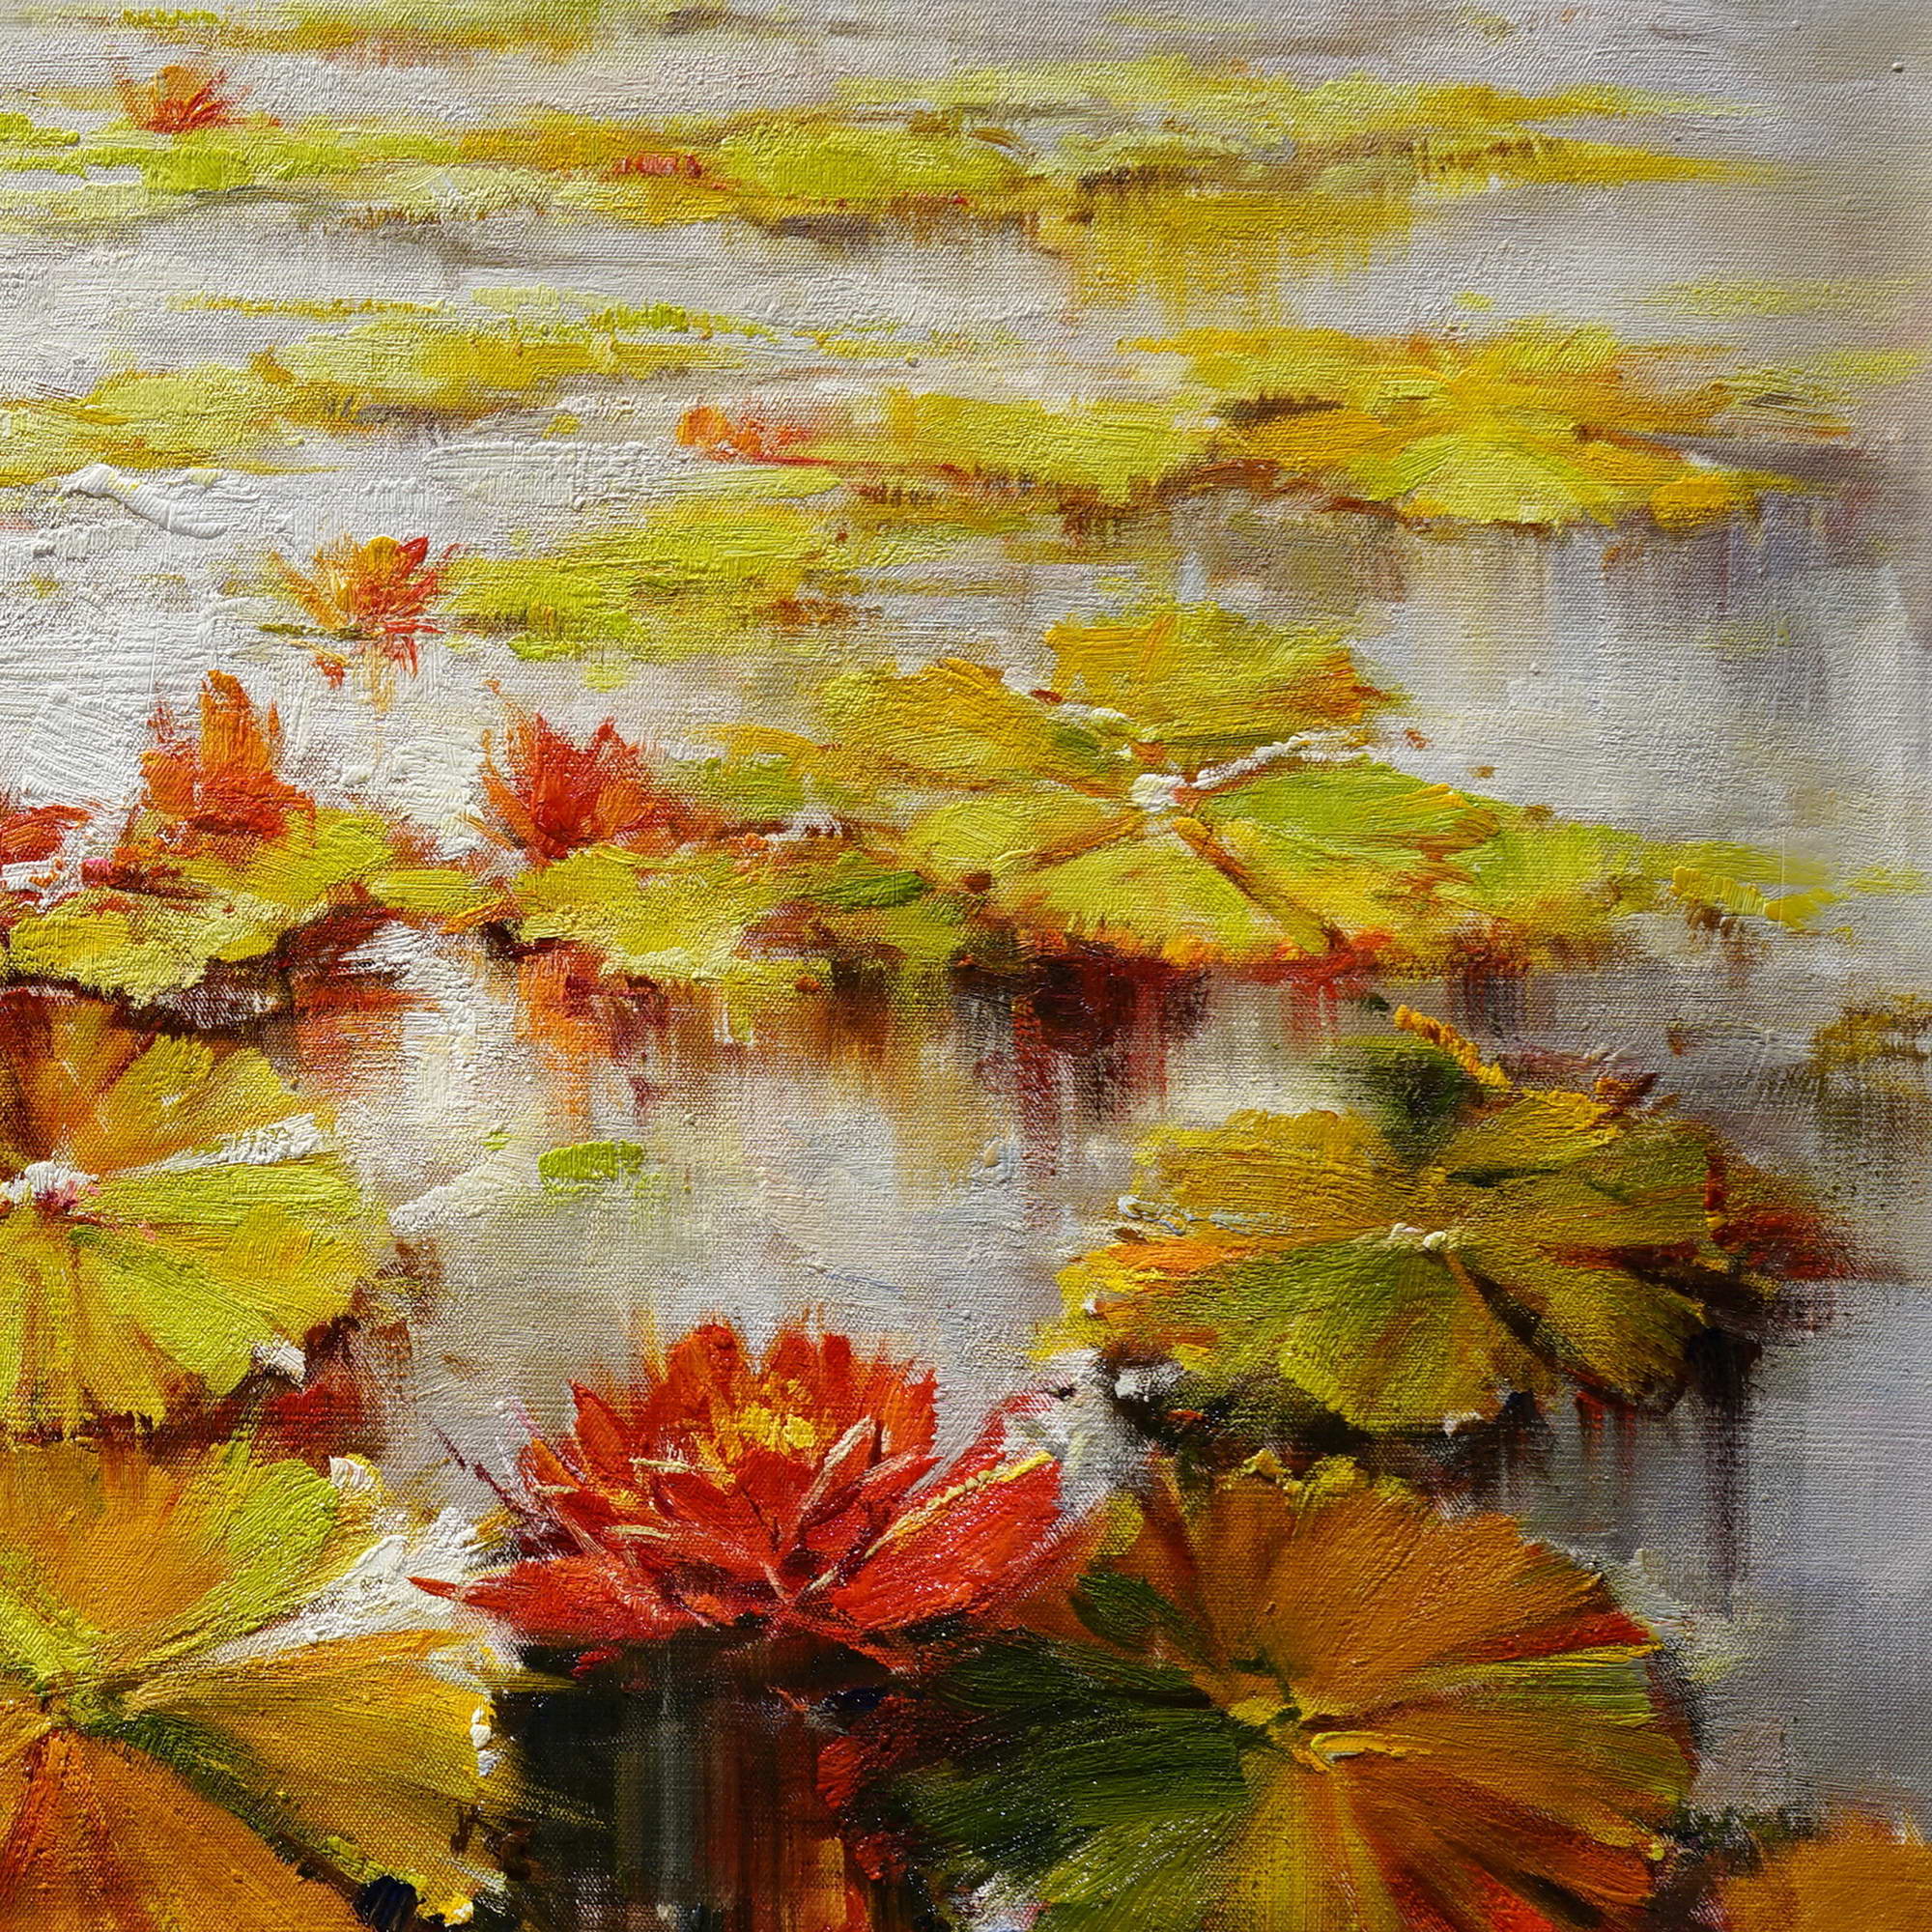 Hand painted Water lily lake 75x150cm